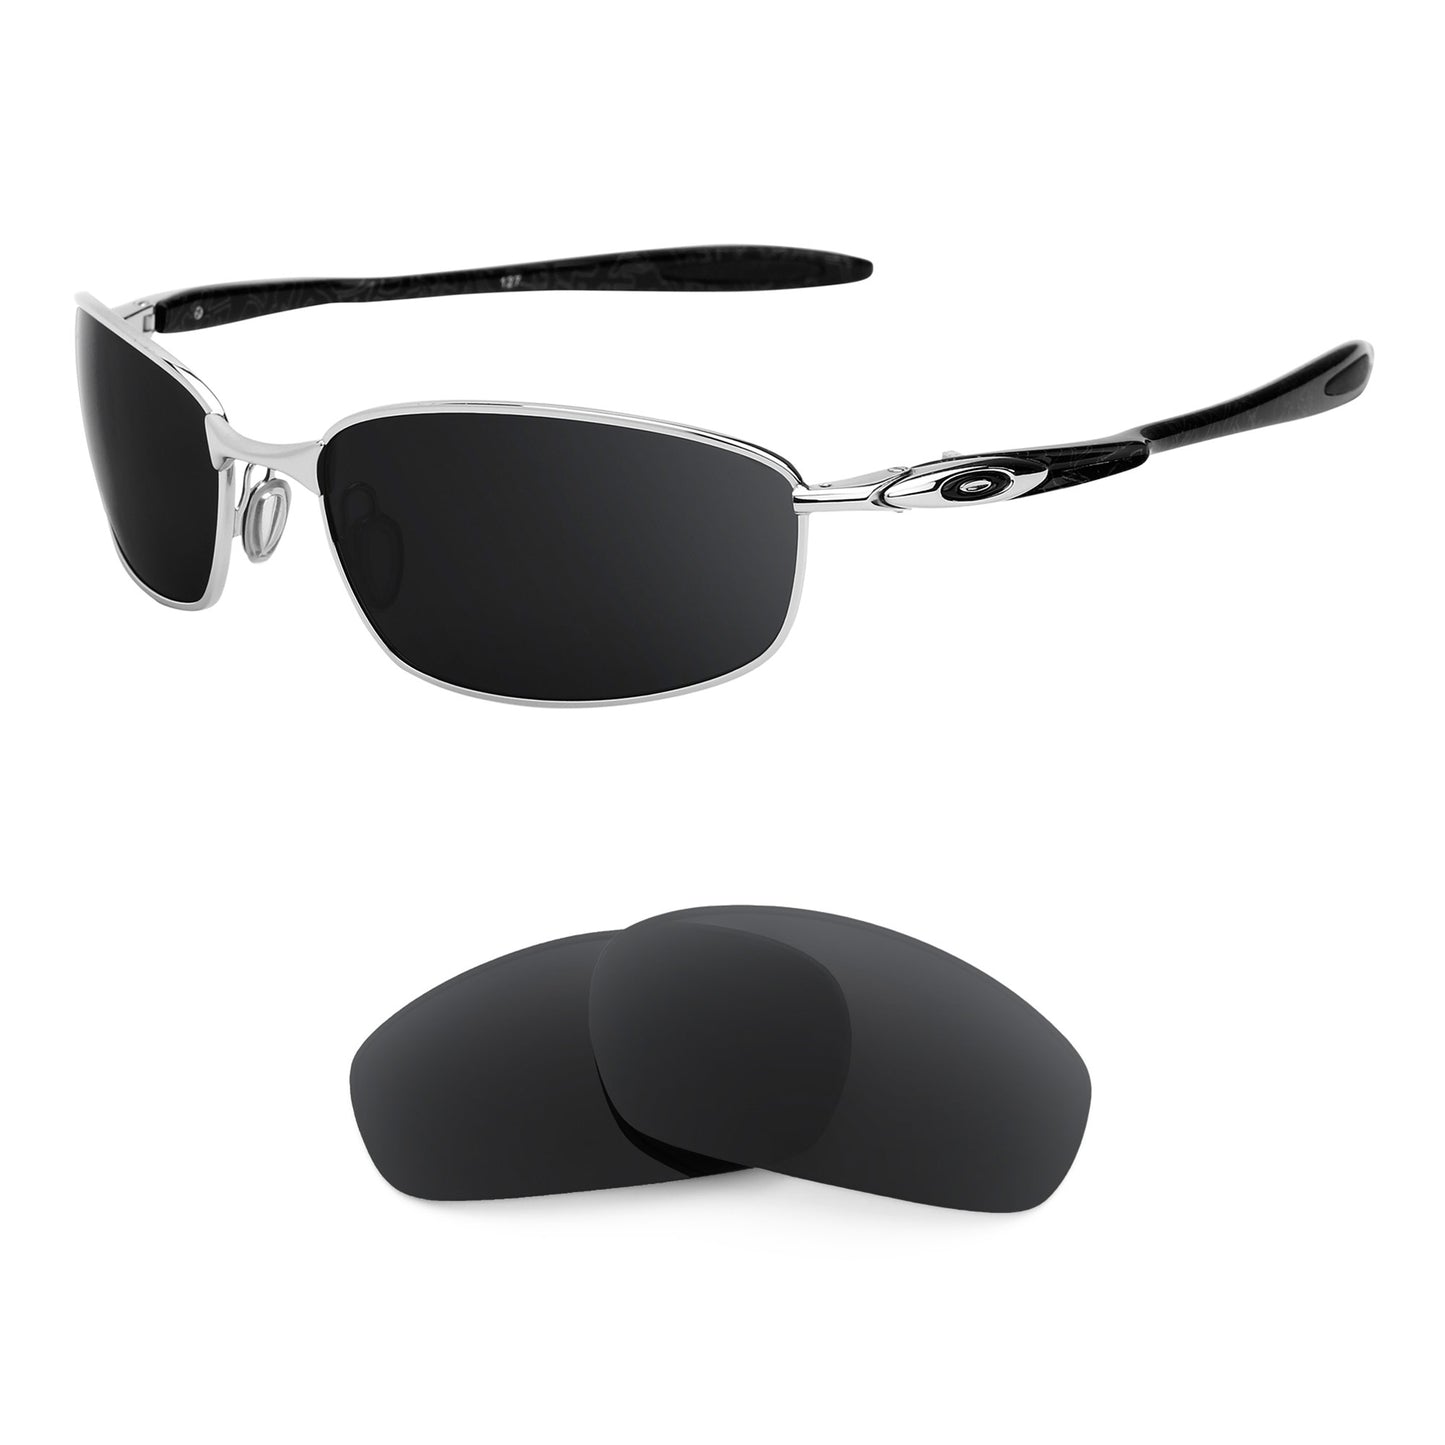 Oakley Blender sunglasses with replacement lenses